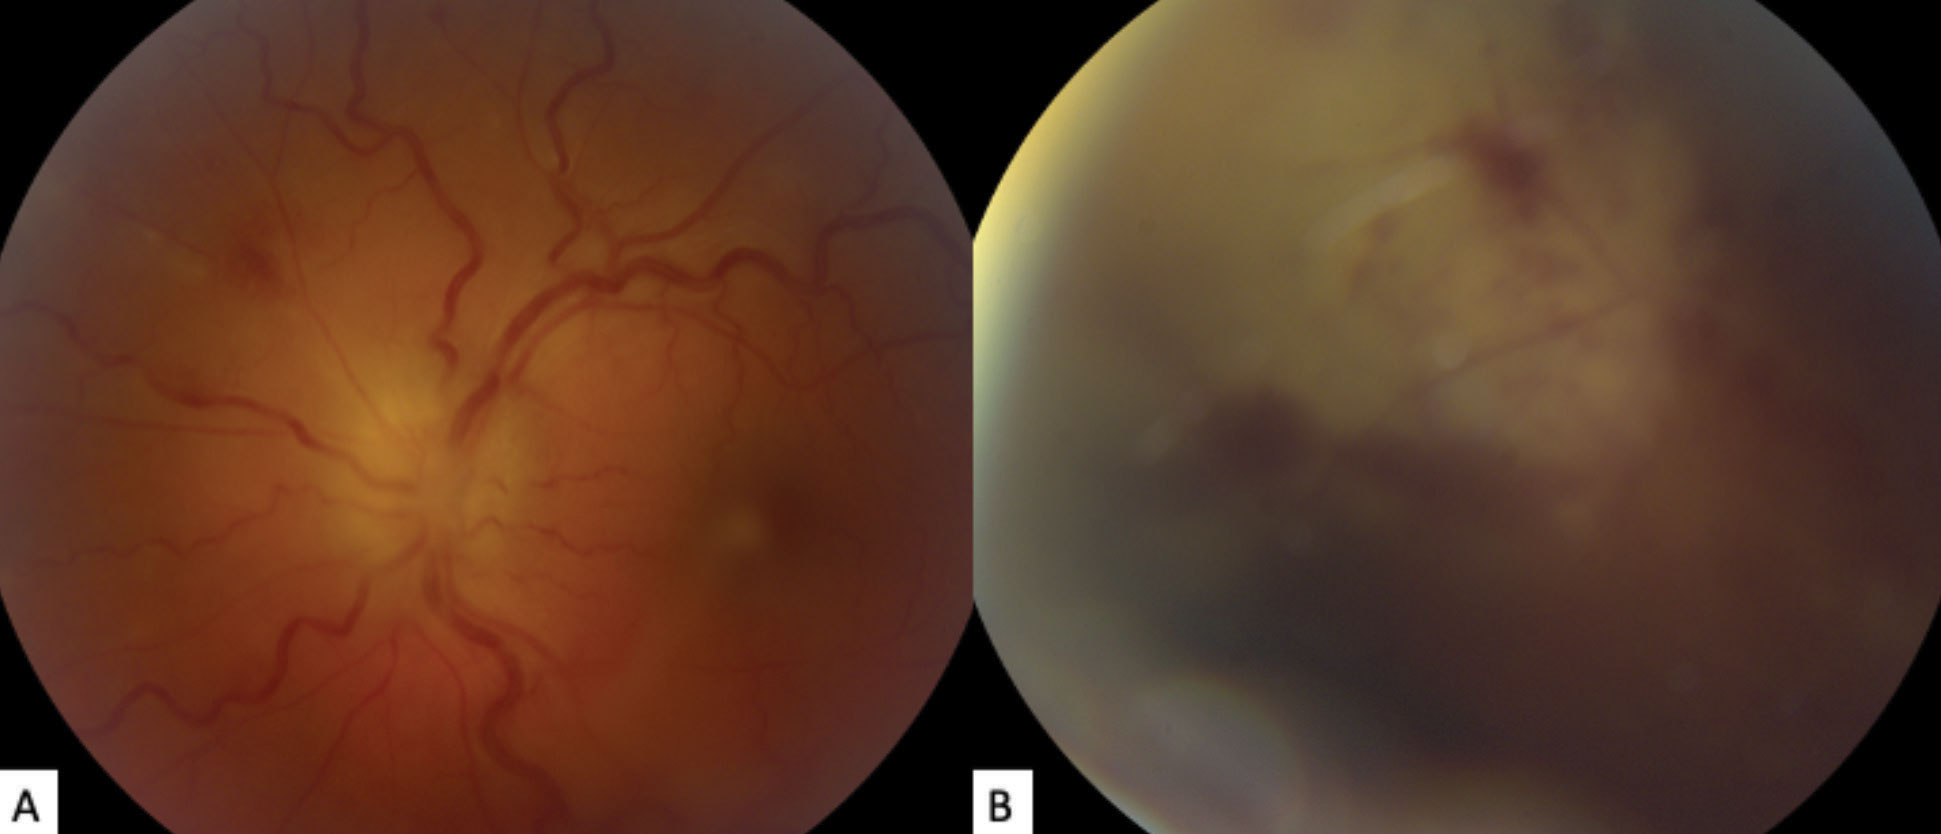 (a) The patient’s fundus photo shows their left eye’s grade 3 optic disc edema, using the modified Frisén scale. Vascular tortuosity, faint retinal whitening and hemorrhaging is also visible superonasally. (b) This photo of the superonasal peripheral fundus shows focal retinal whitening with hemorrhage obscured by vitreous haze.